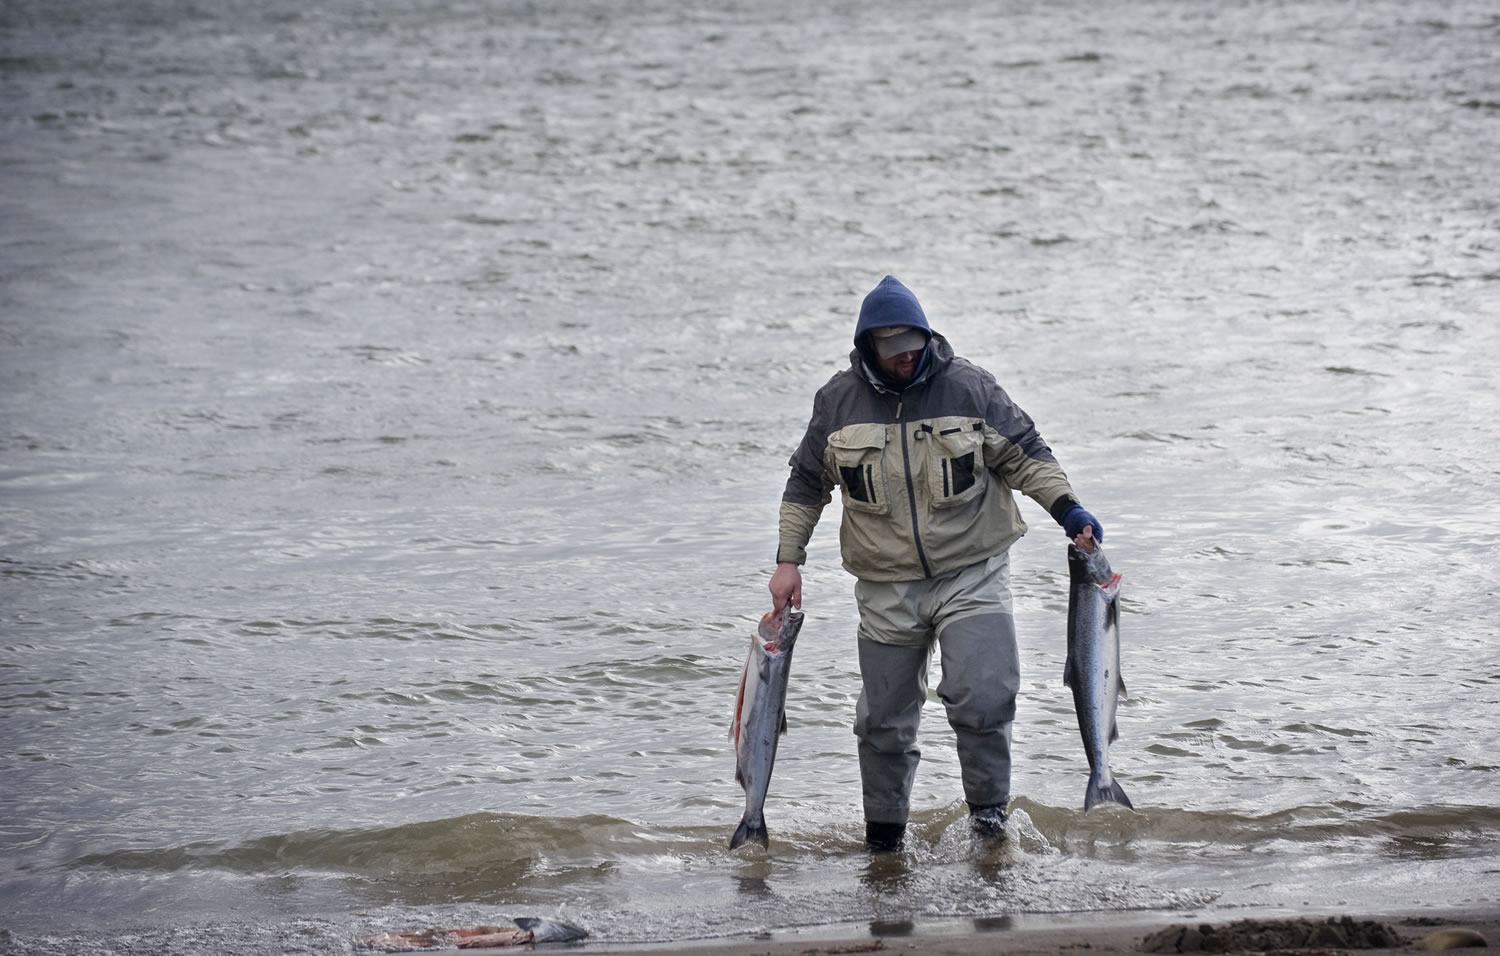 Sportsmen caught almost 20,000 spring chinook in 2015 from the lower Columbia River.